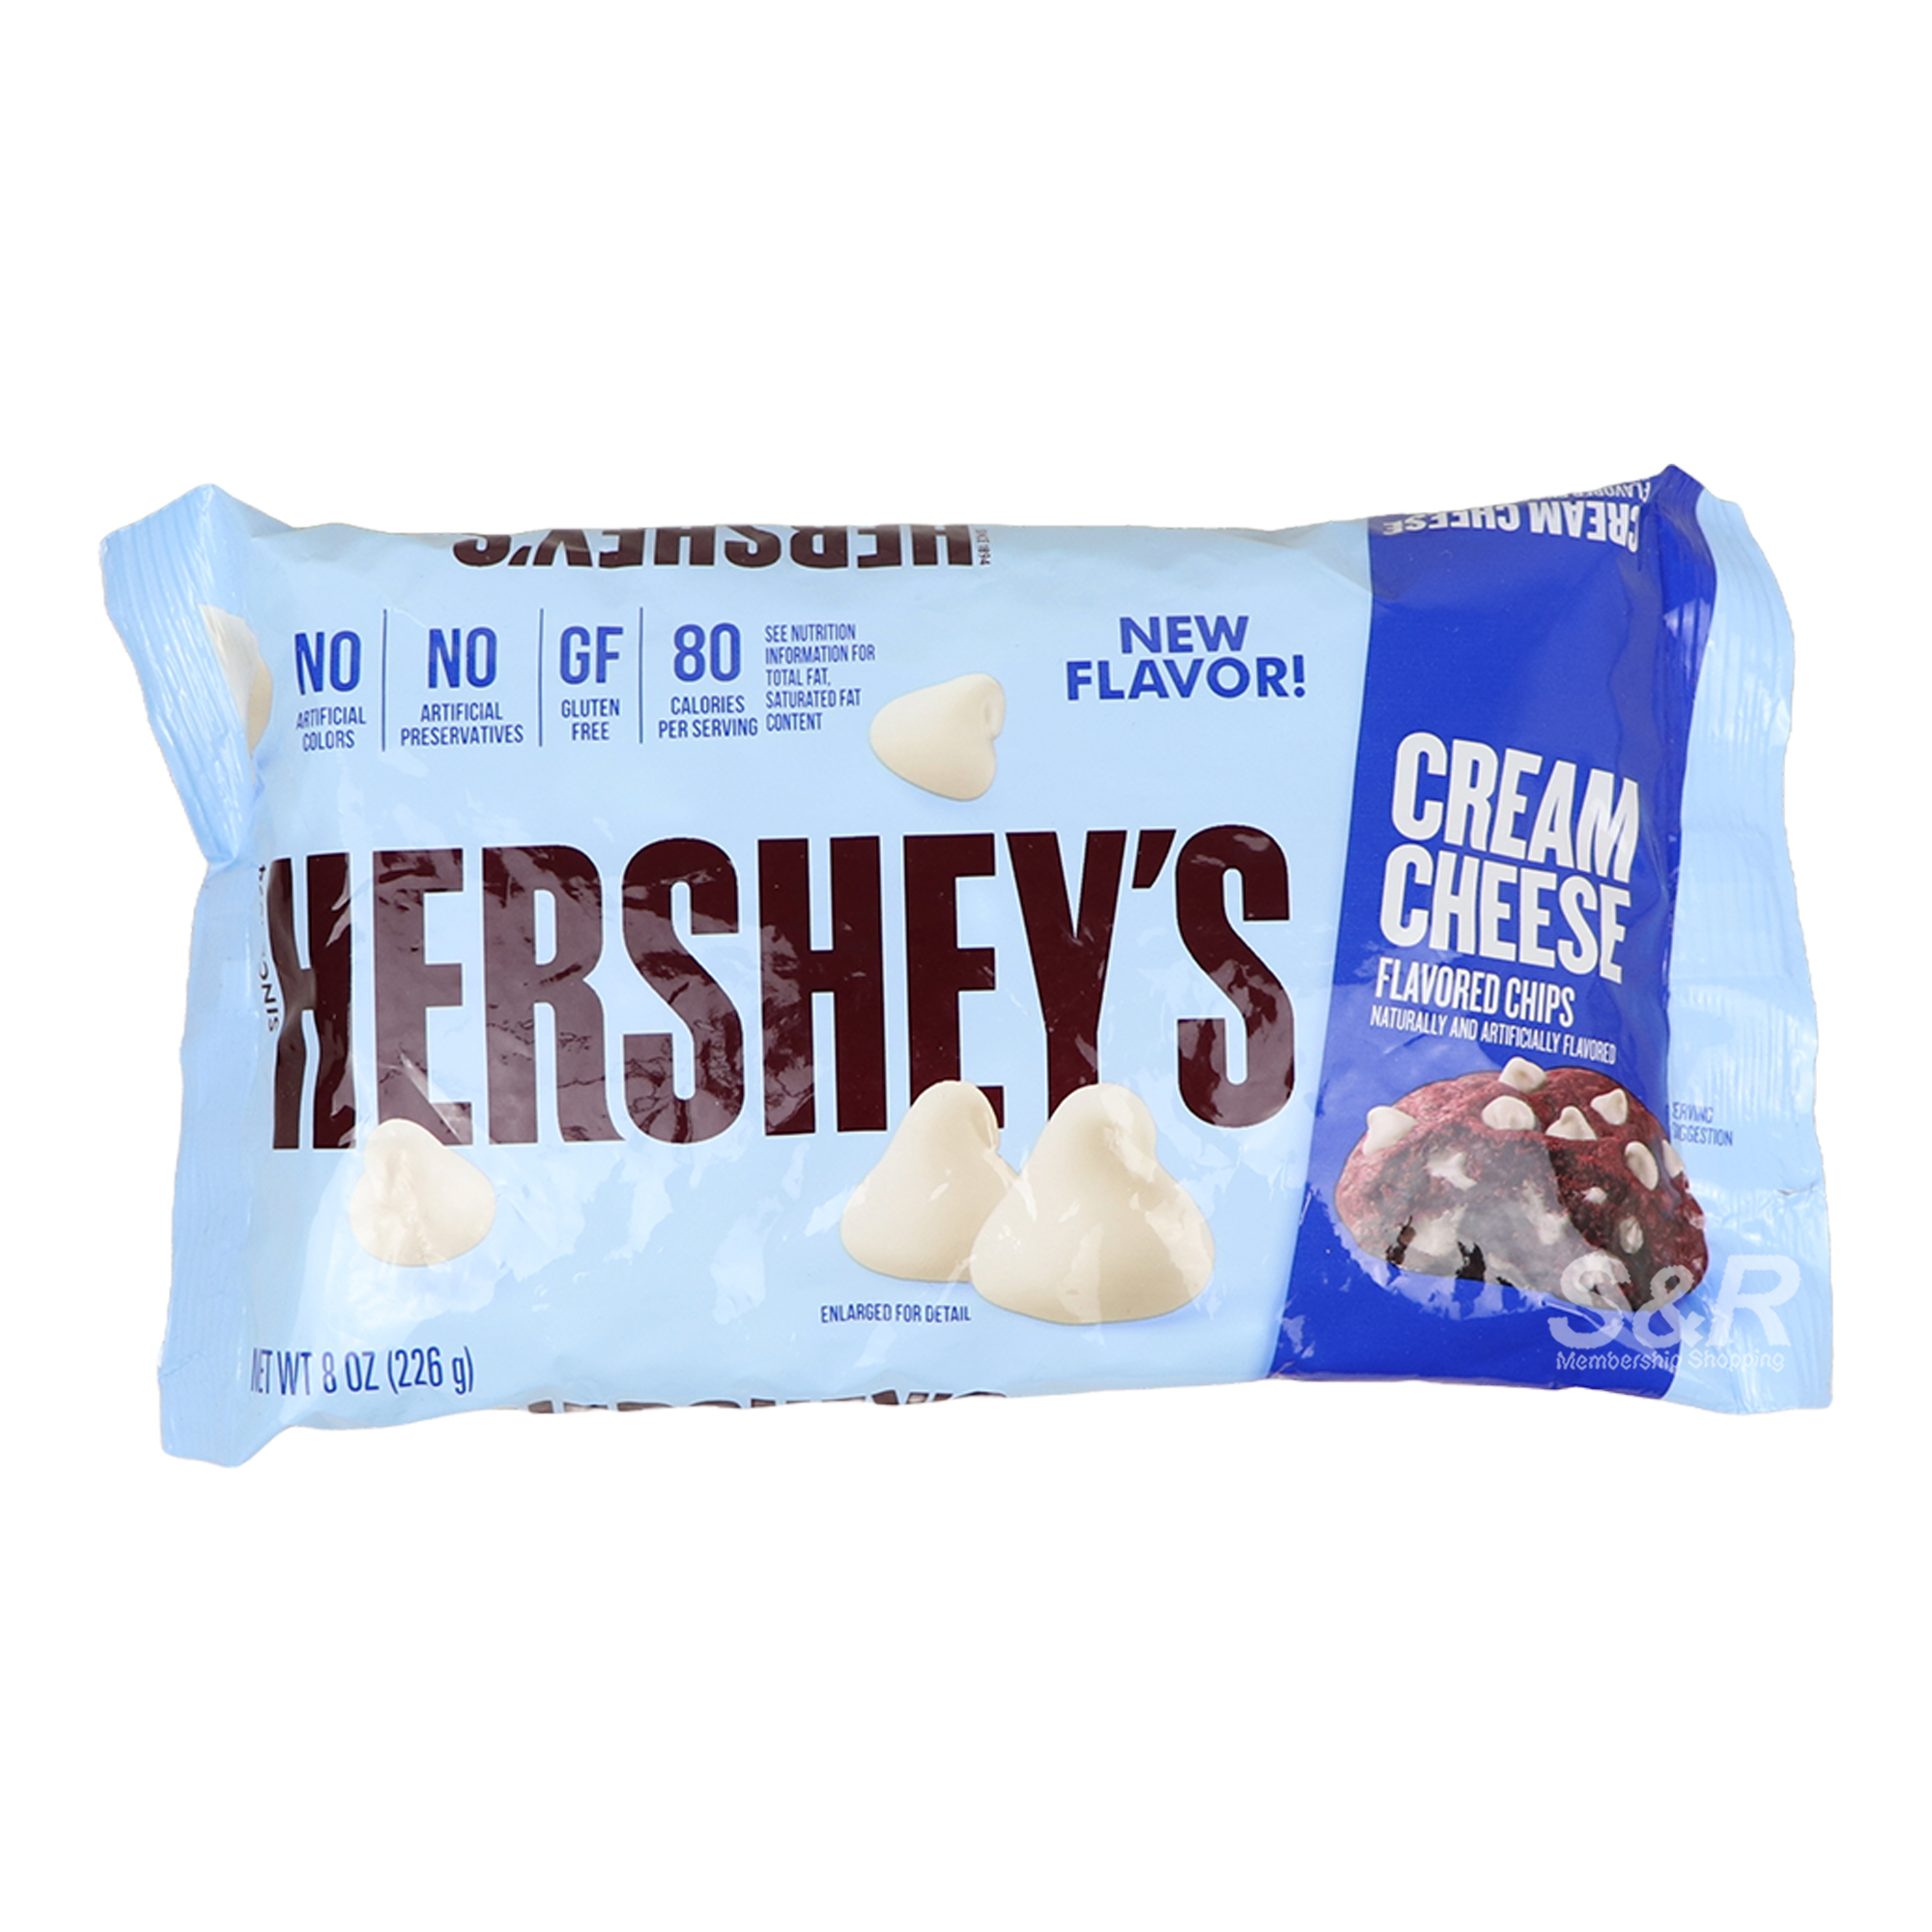 https://www.snrshopping.com/upload/product/Hershey-s-Cream-Cheese-Flavored-Baking-Chips-226g-10895/Hersheys%20Cream%20Cheese%20Flavored%20Baking%20Chips%20226g-p2lZXZVRGR.jpg